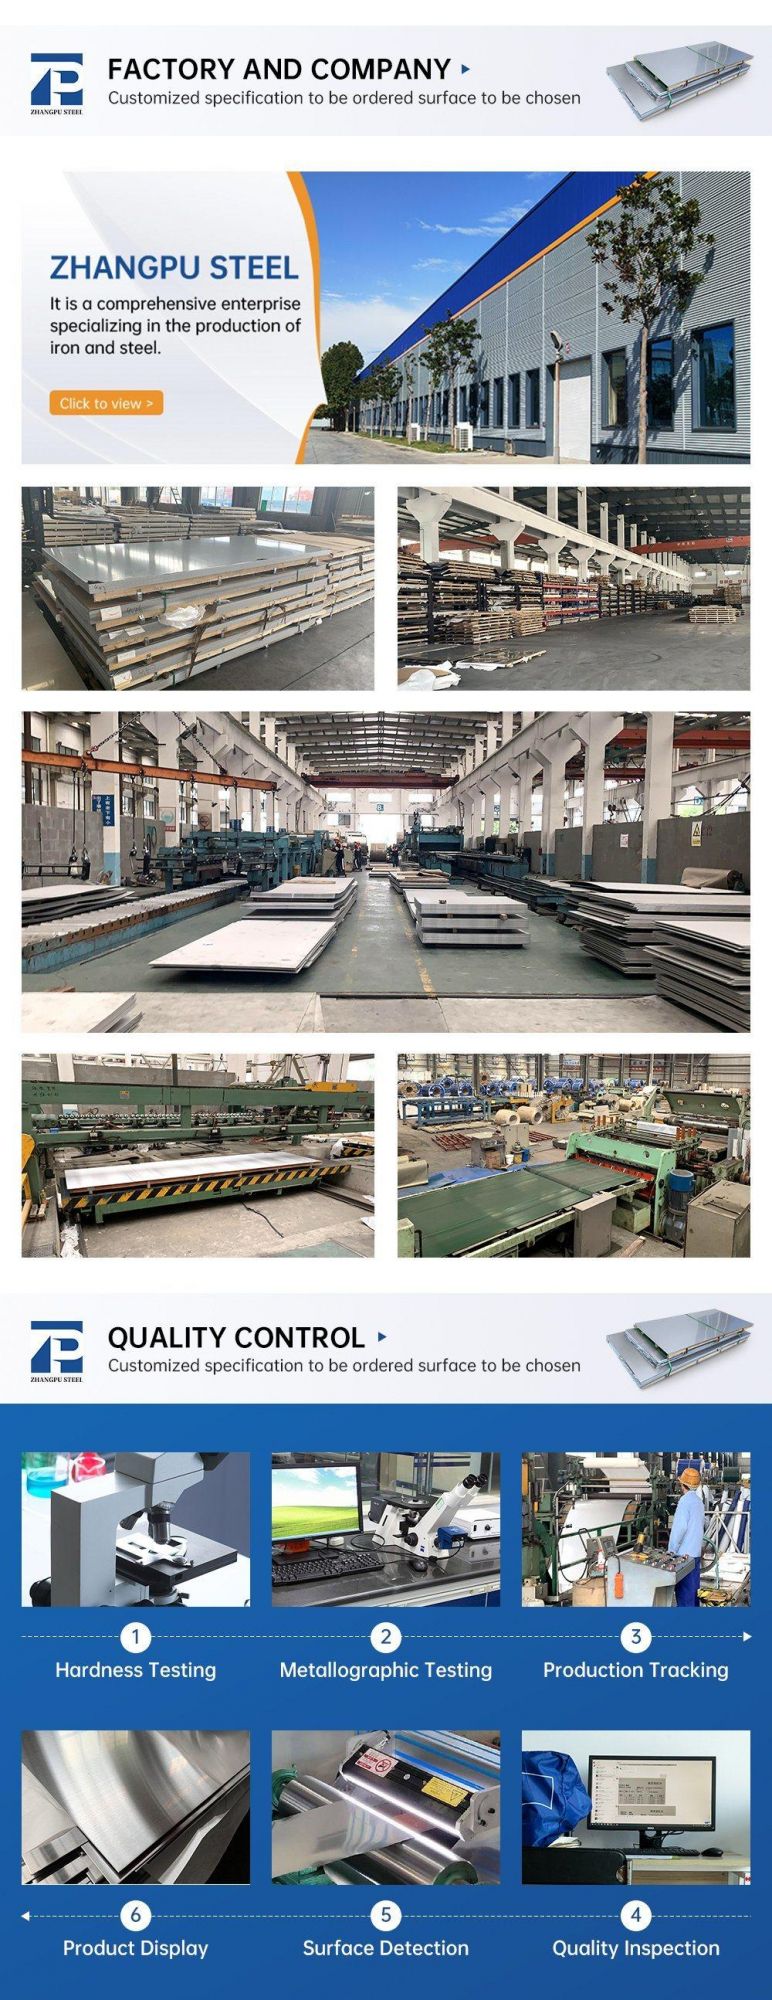 High Quality ASTM Stainless Steel Plate 304L 304 321 316L 310S 2205 430 Stainless Steel Sheet Price